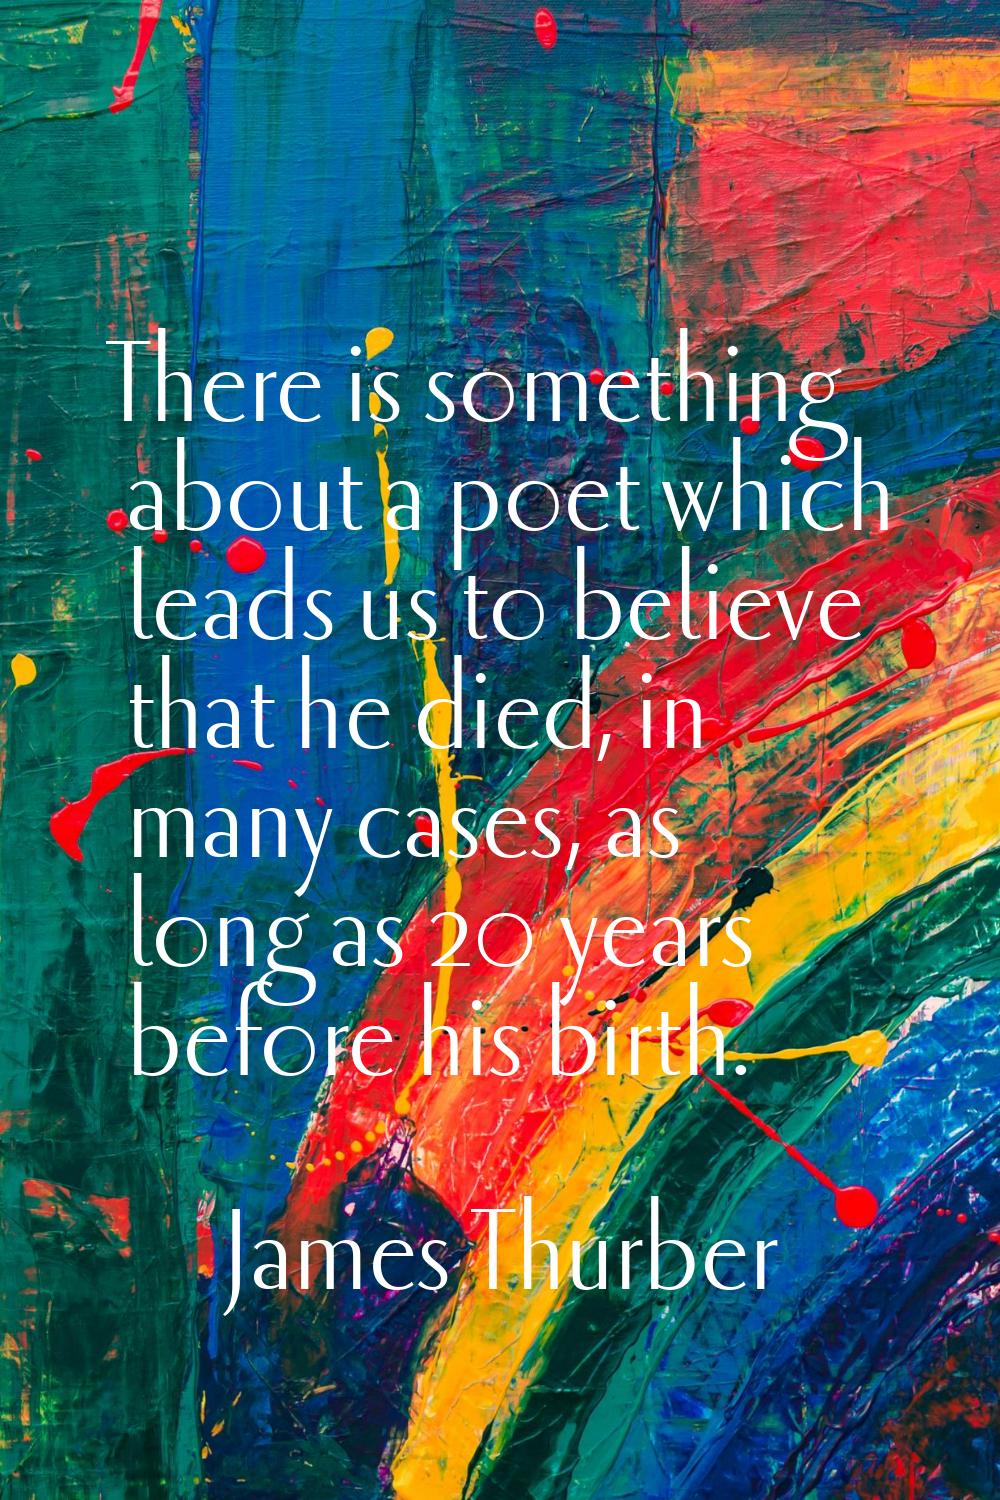 There is something about a poet which leads us to believe that he died, in many cases, as long as 2